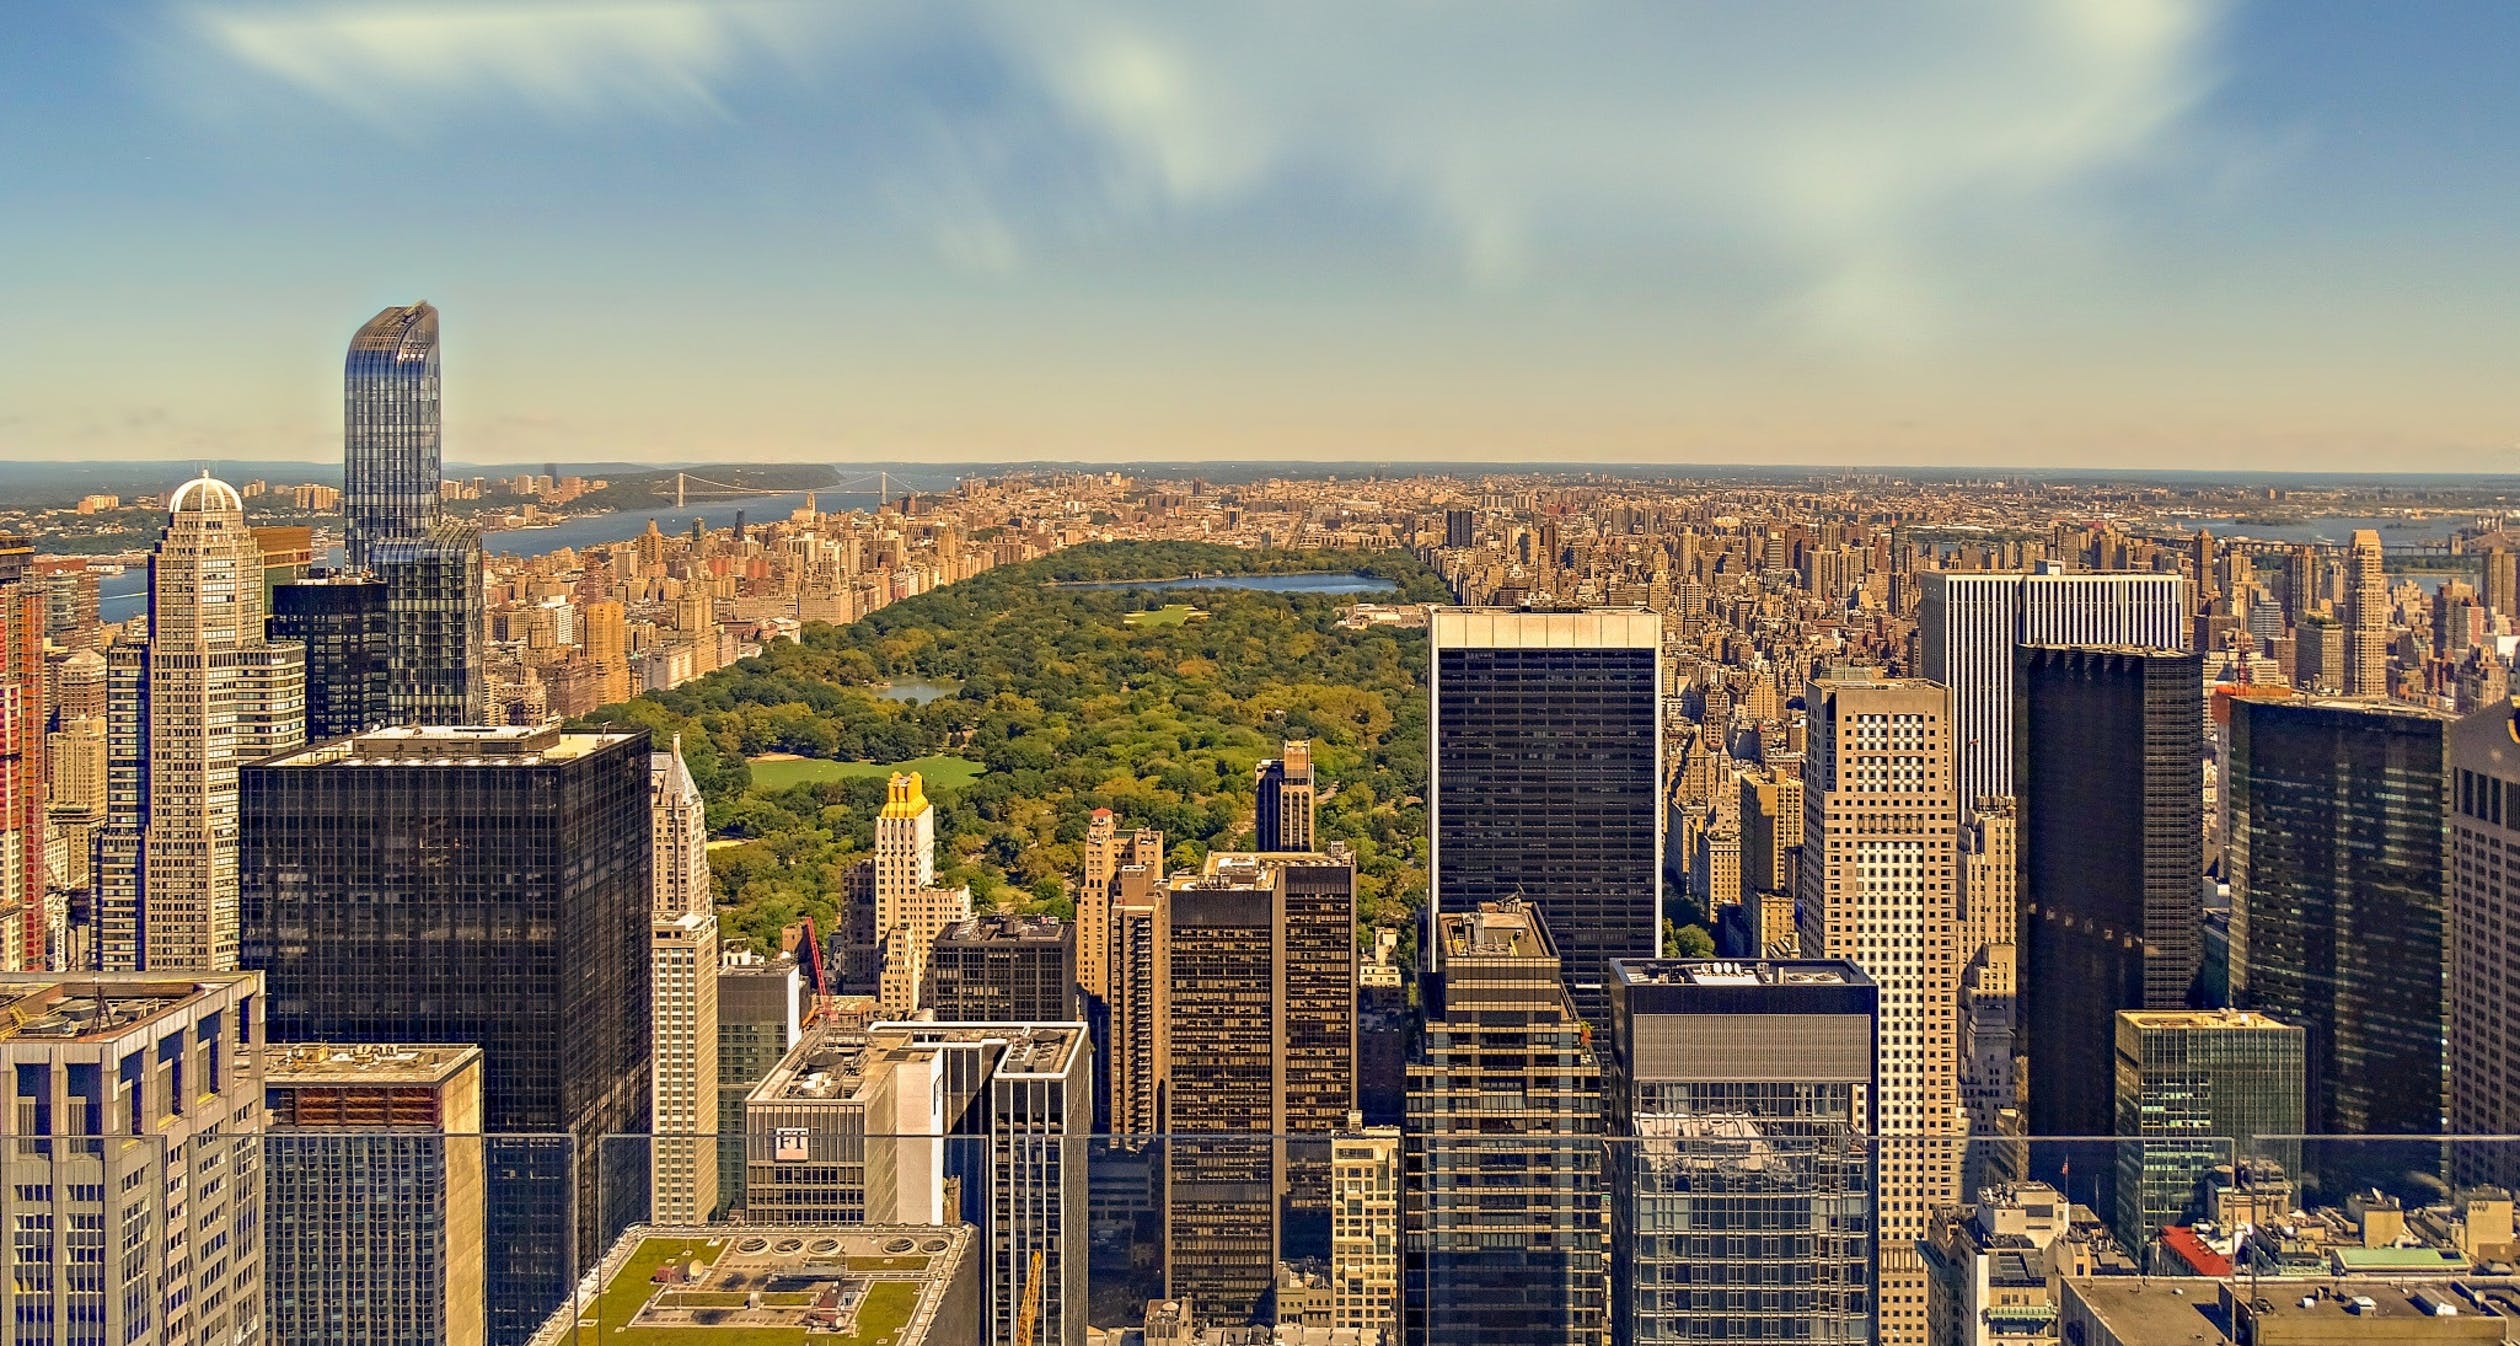 Central Park - The Big Apple: Top 10 Must-See Attractions for NYC Travelers